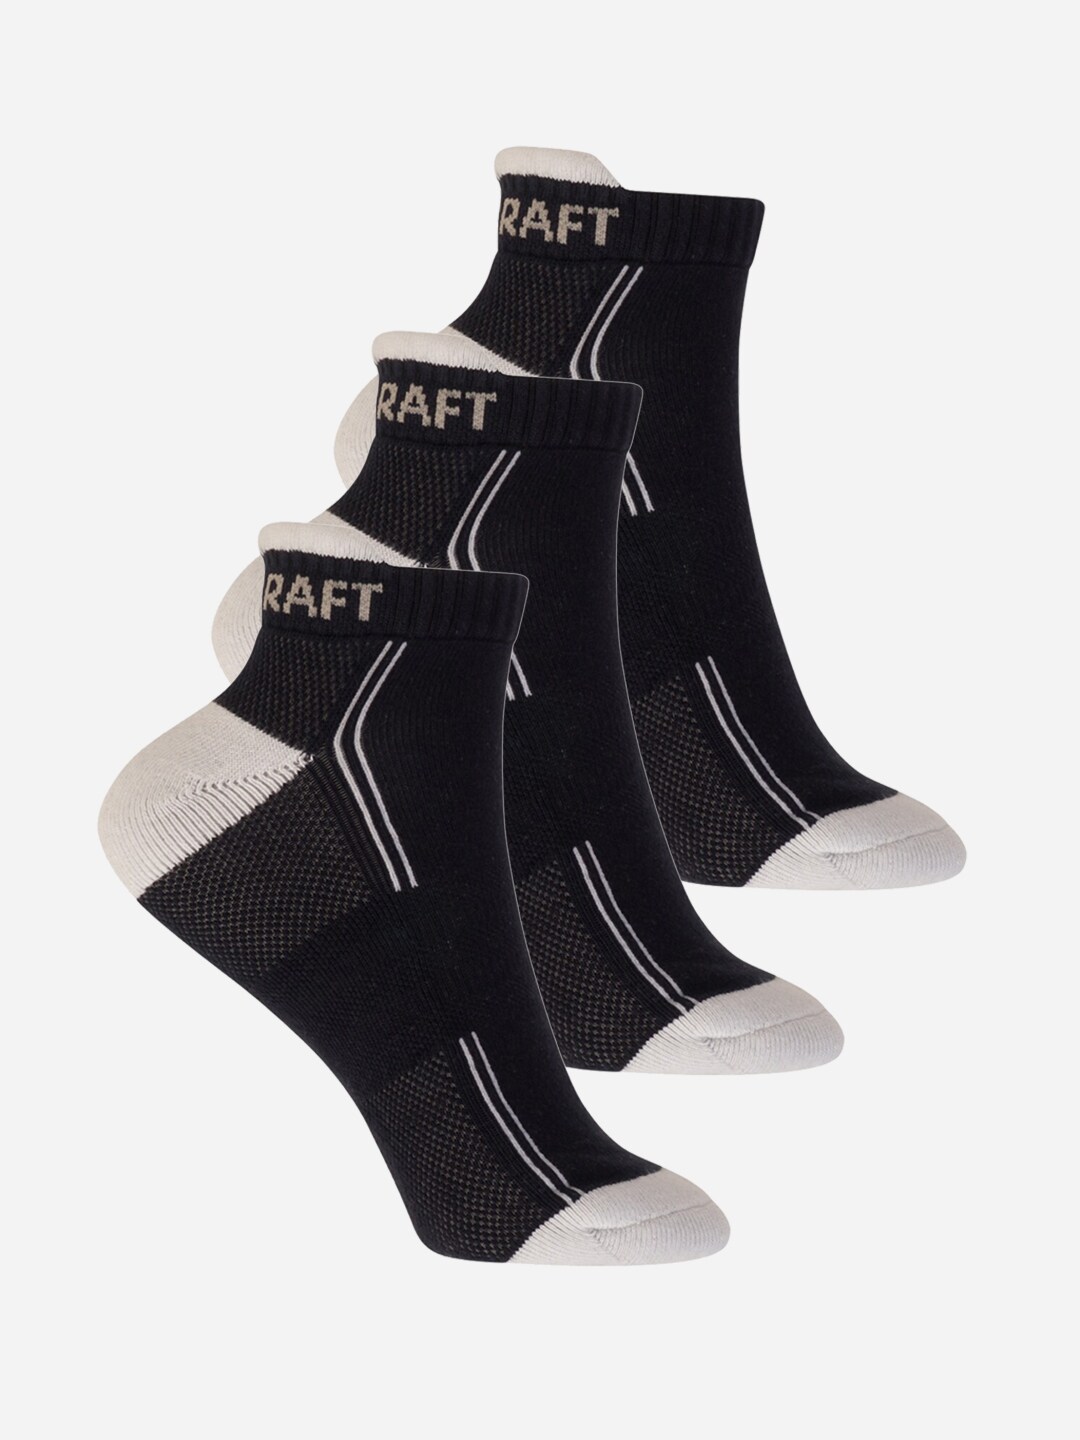 Wildcraft Adults Navy Blue & Grey Pack of 3 Colourblocked Ankle Length Socks Price in India